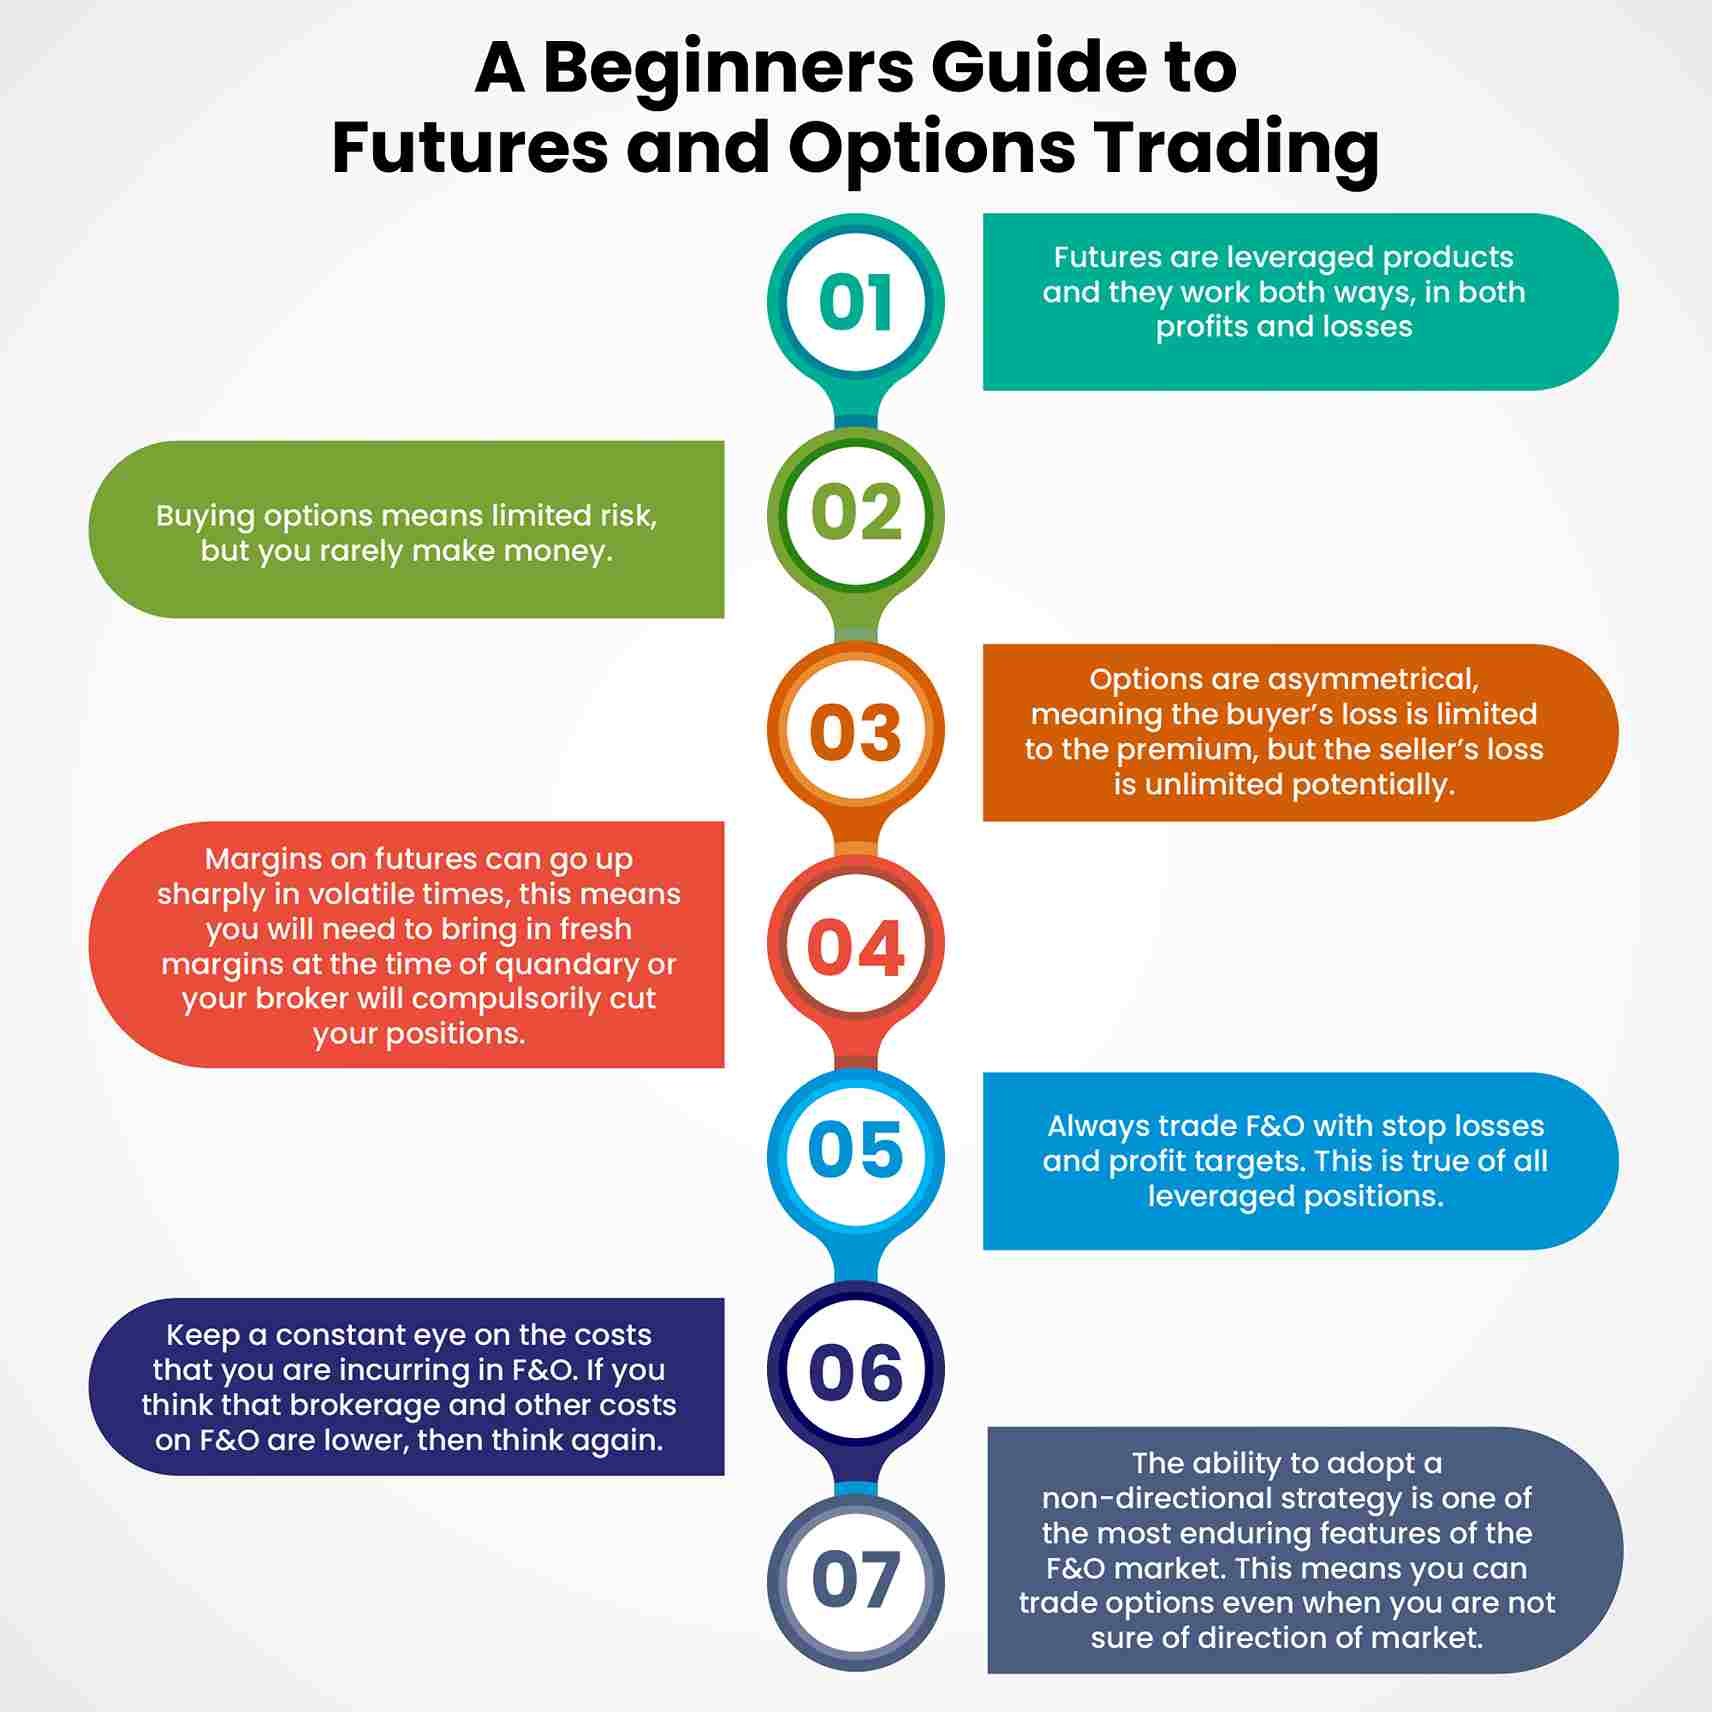 A Beginners Guide to Futures and Options Trading